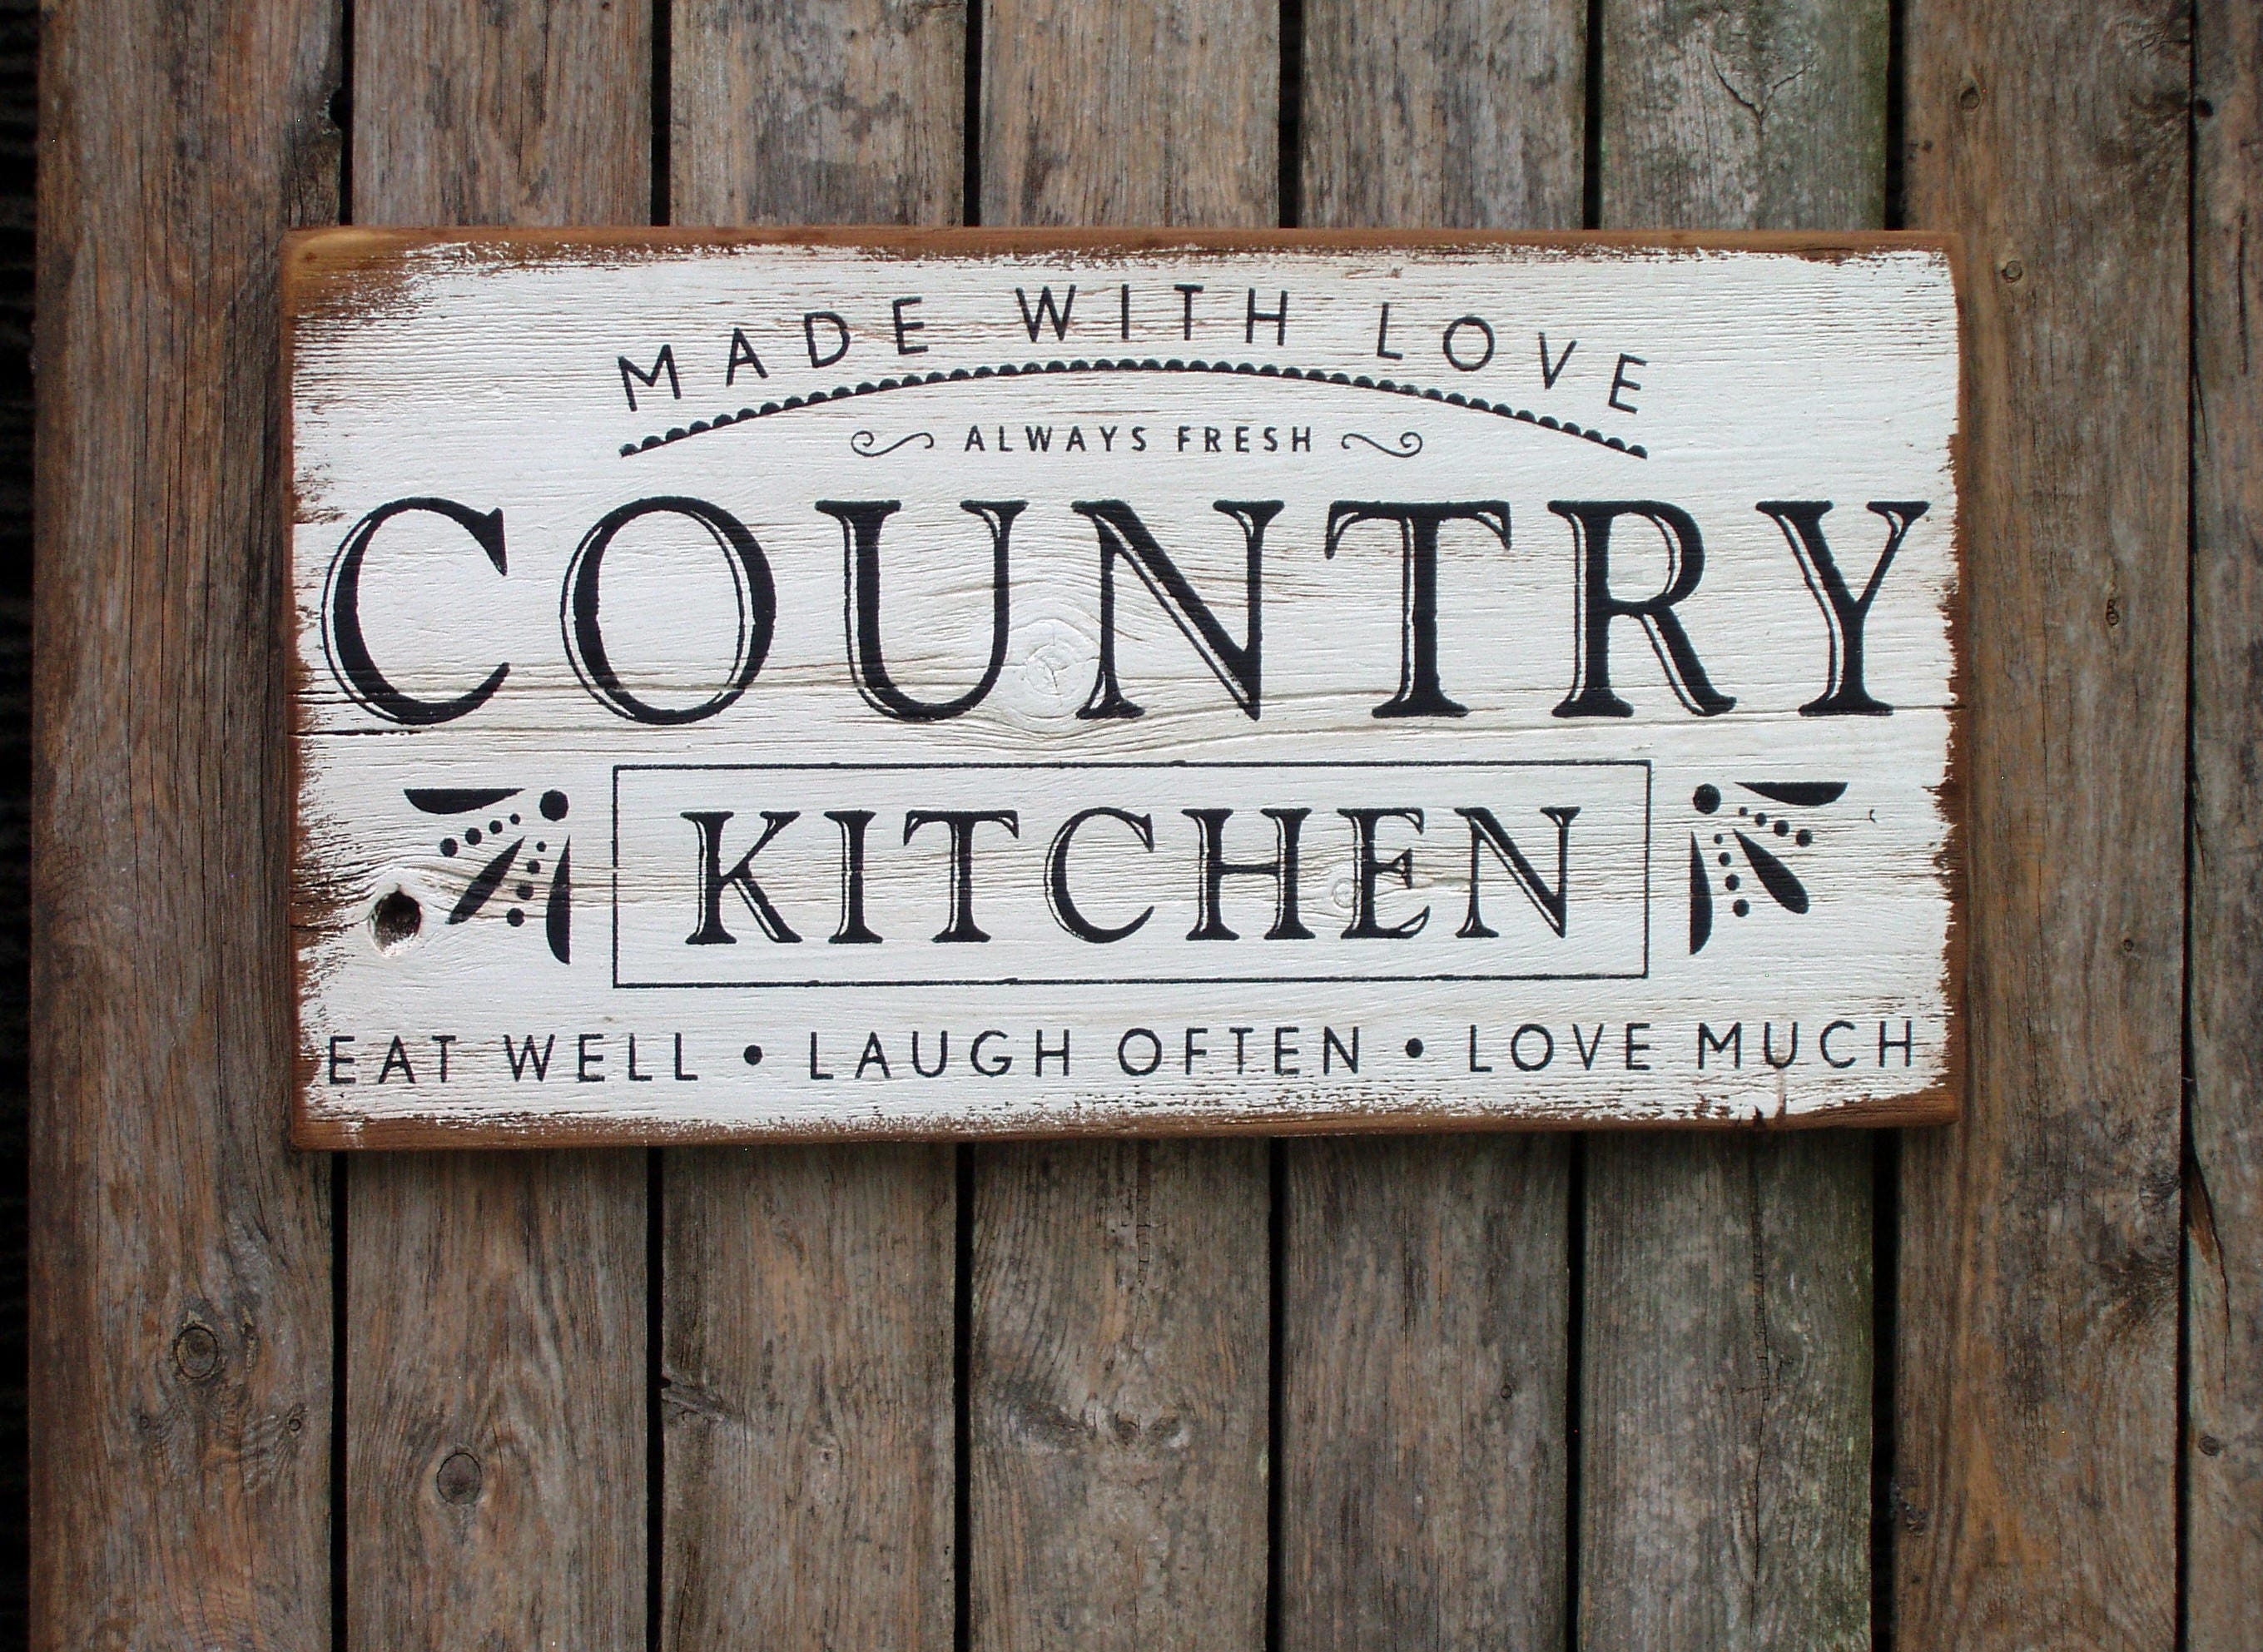 Made with love COUNTRY KITCHEN wood sign rustic farmhouse